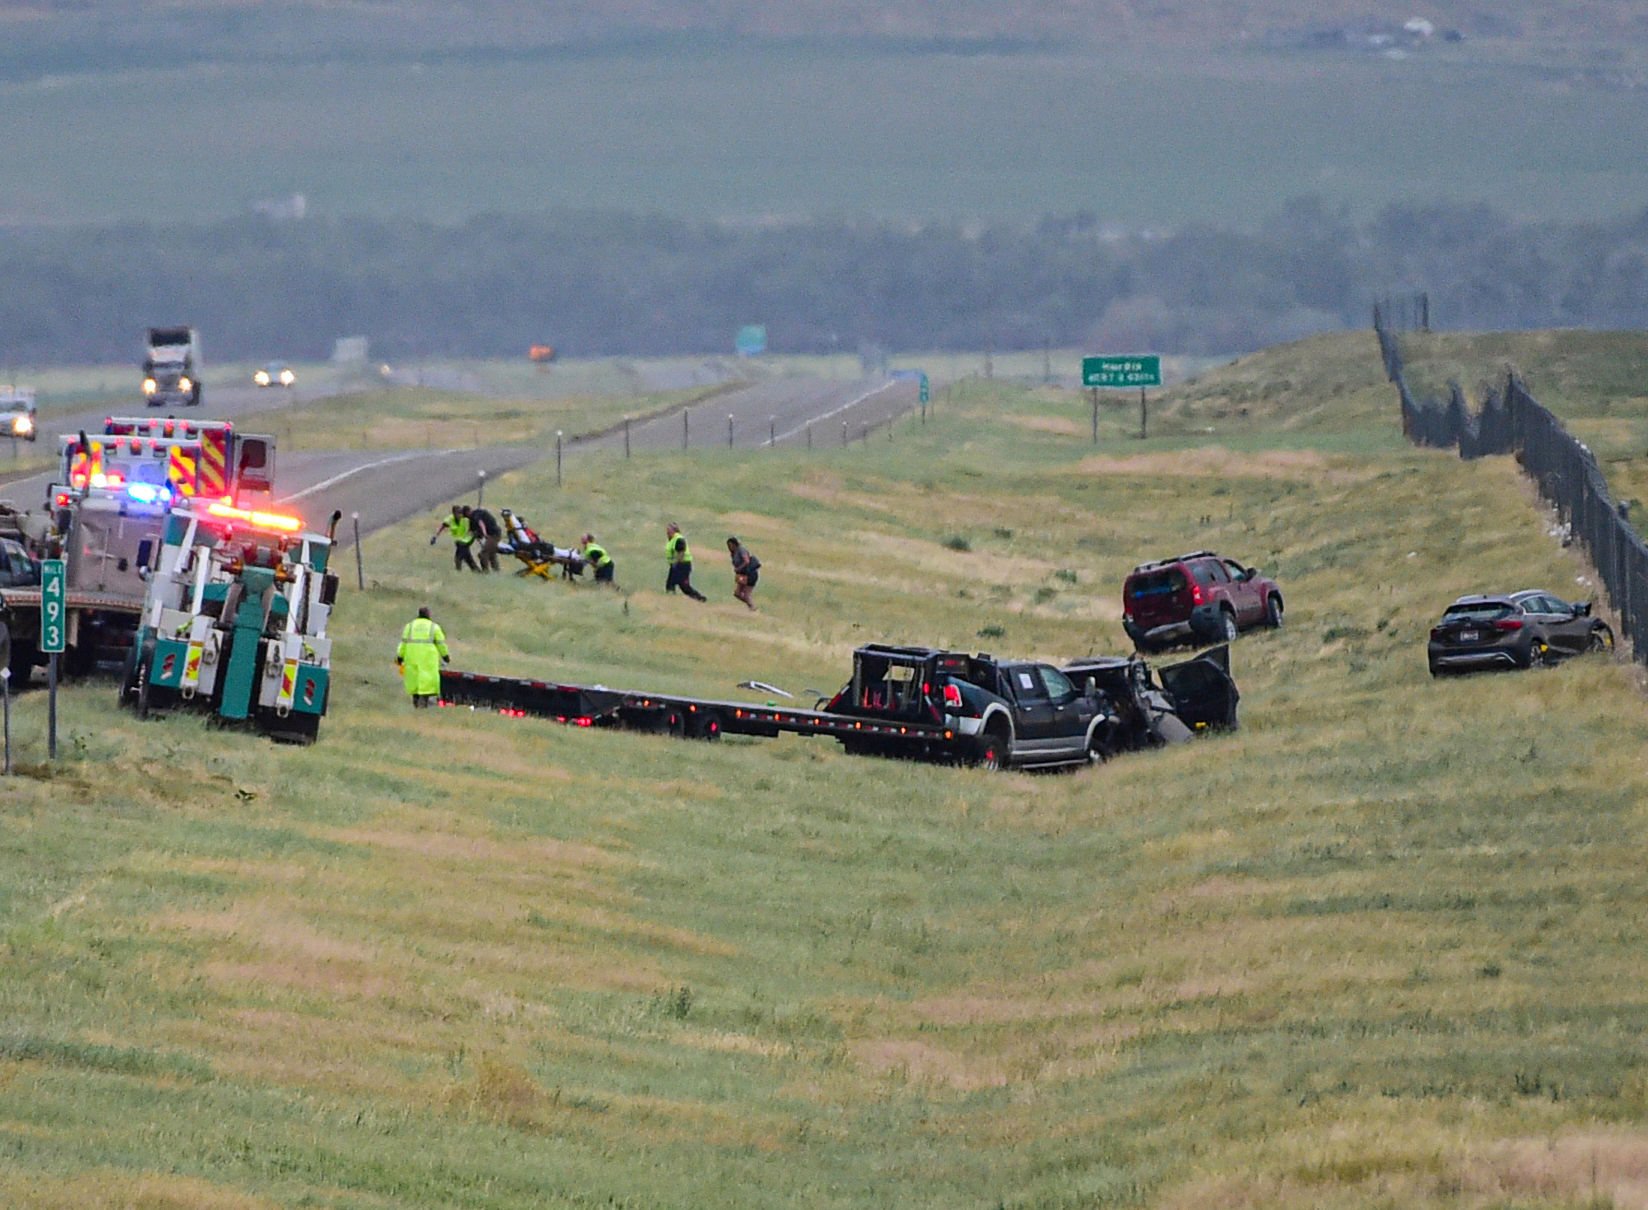 Montana deaths: What led to the multiple vehicle collisions that claimed 6 lives